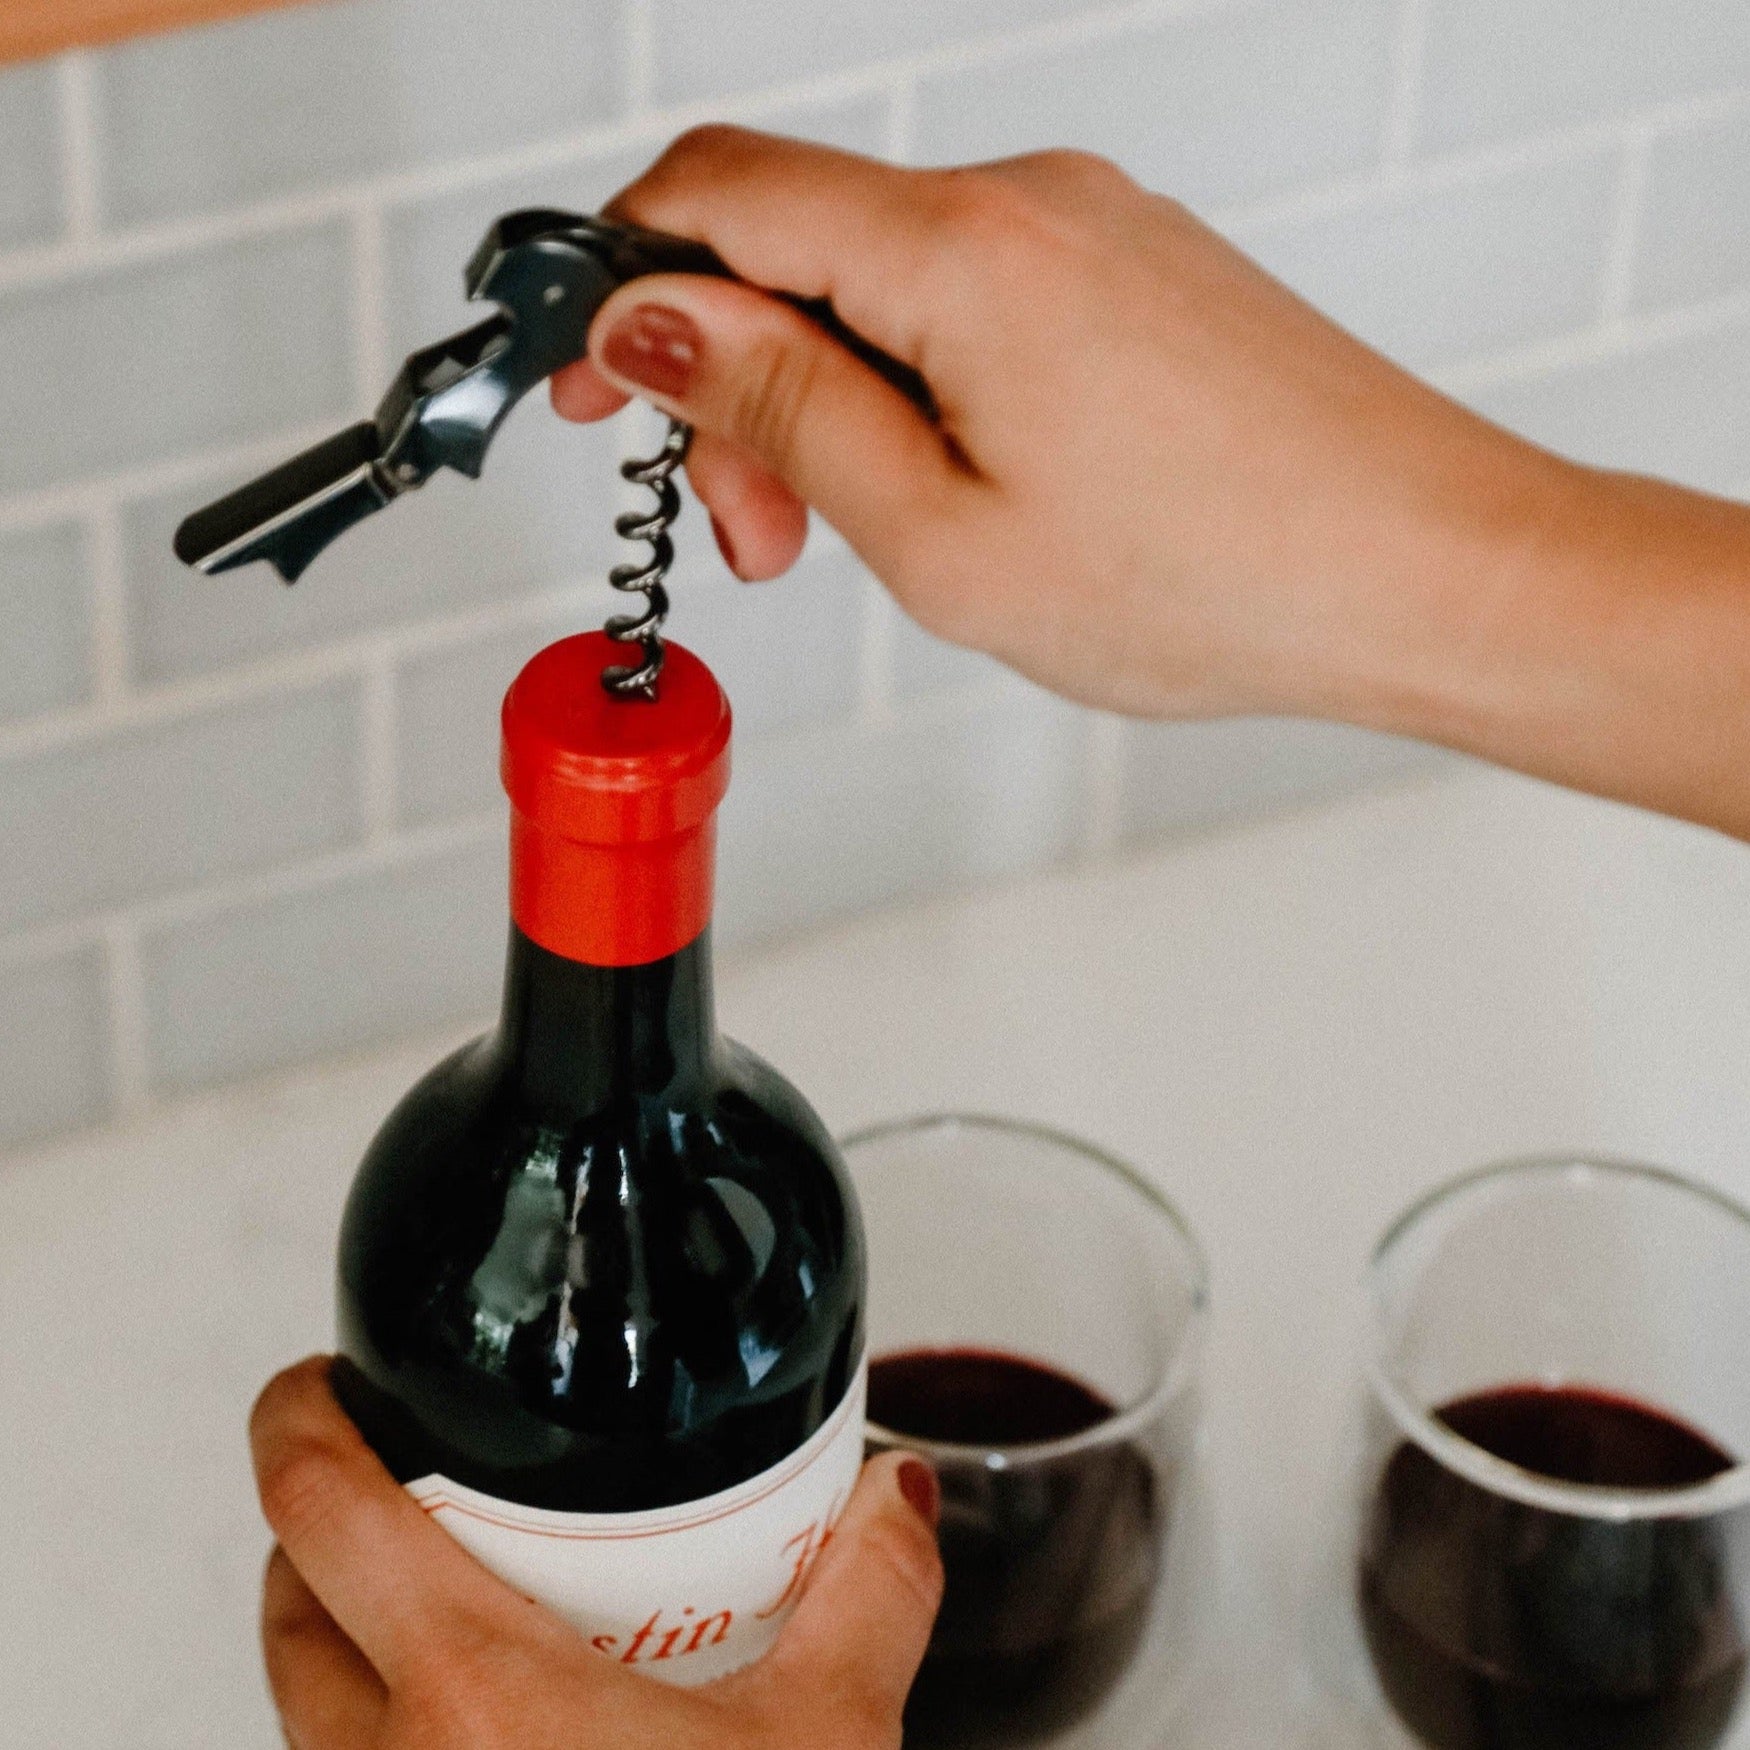 A black wine opener being used to open a bottle of red wine..